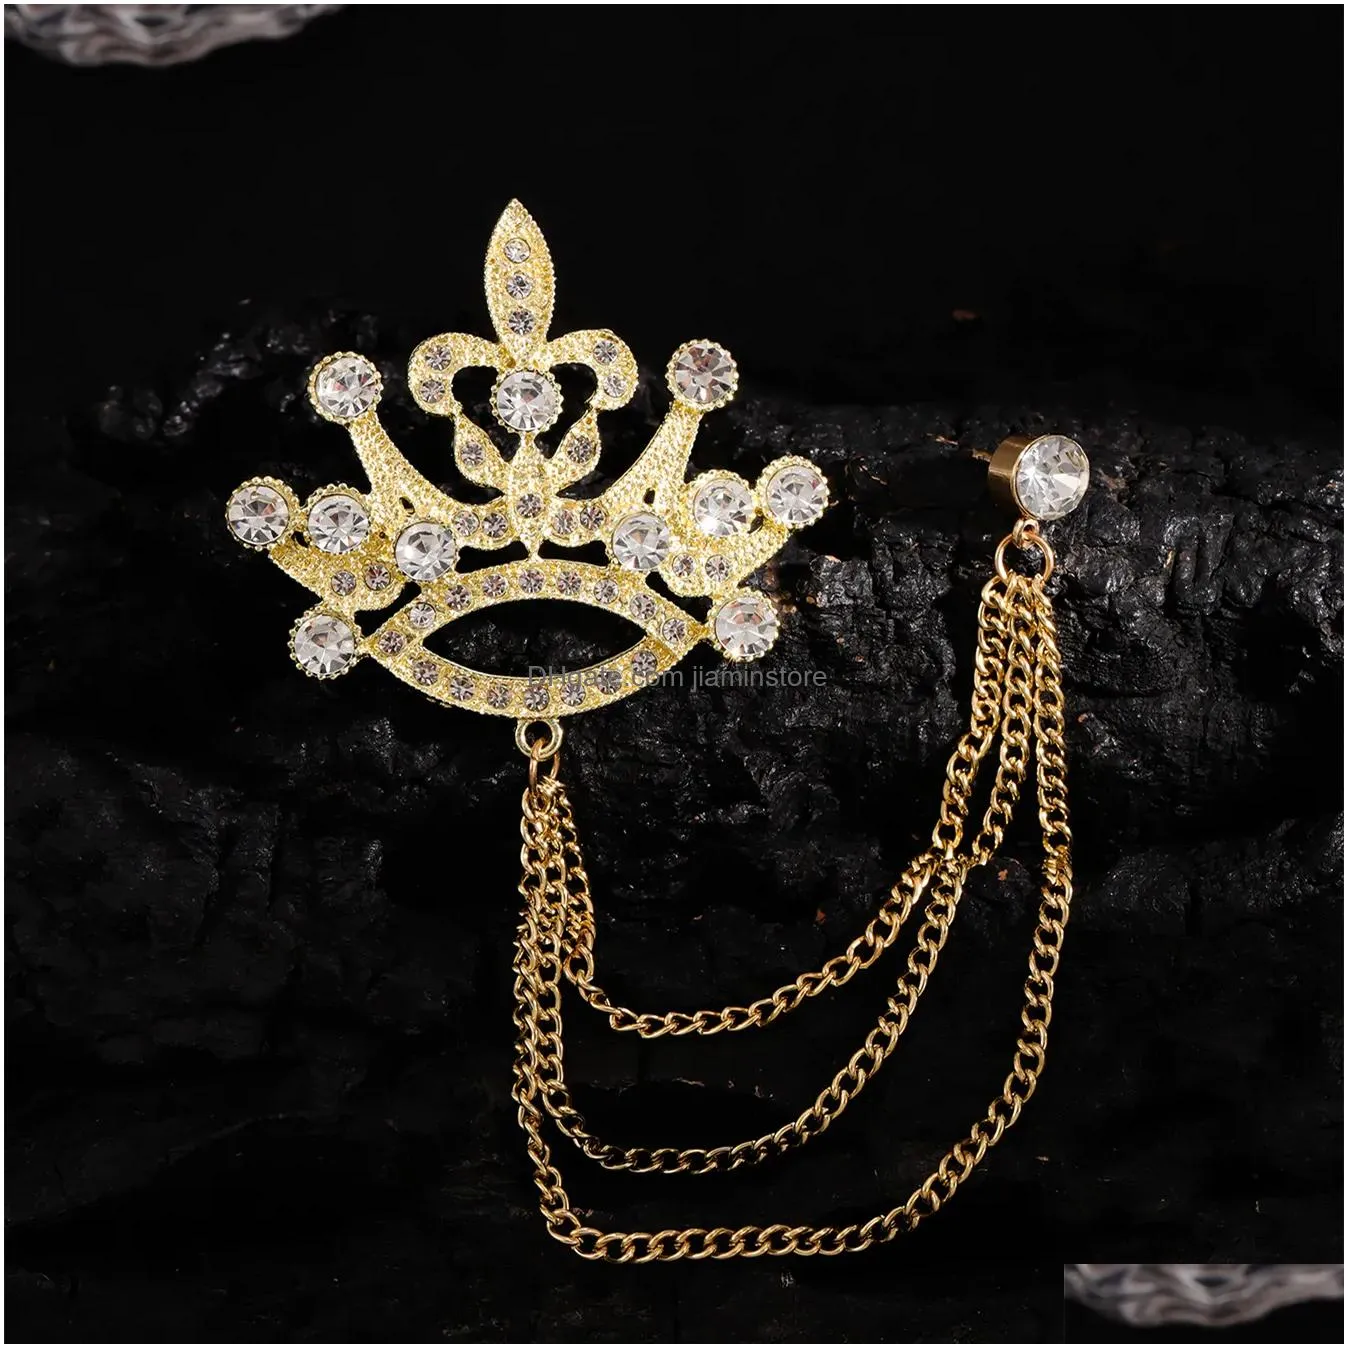 golden mens large crown shape fashion personality shirt accessories formal wear accessories brooch